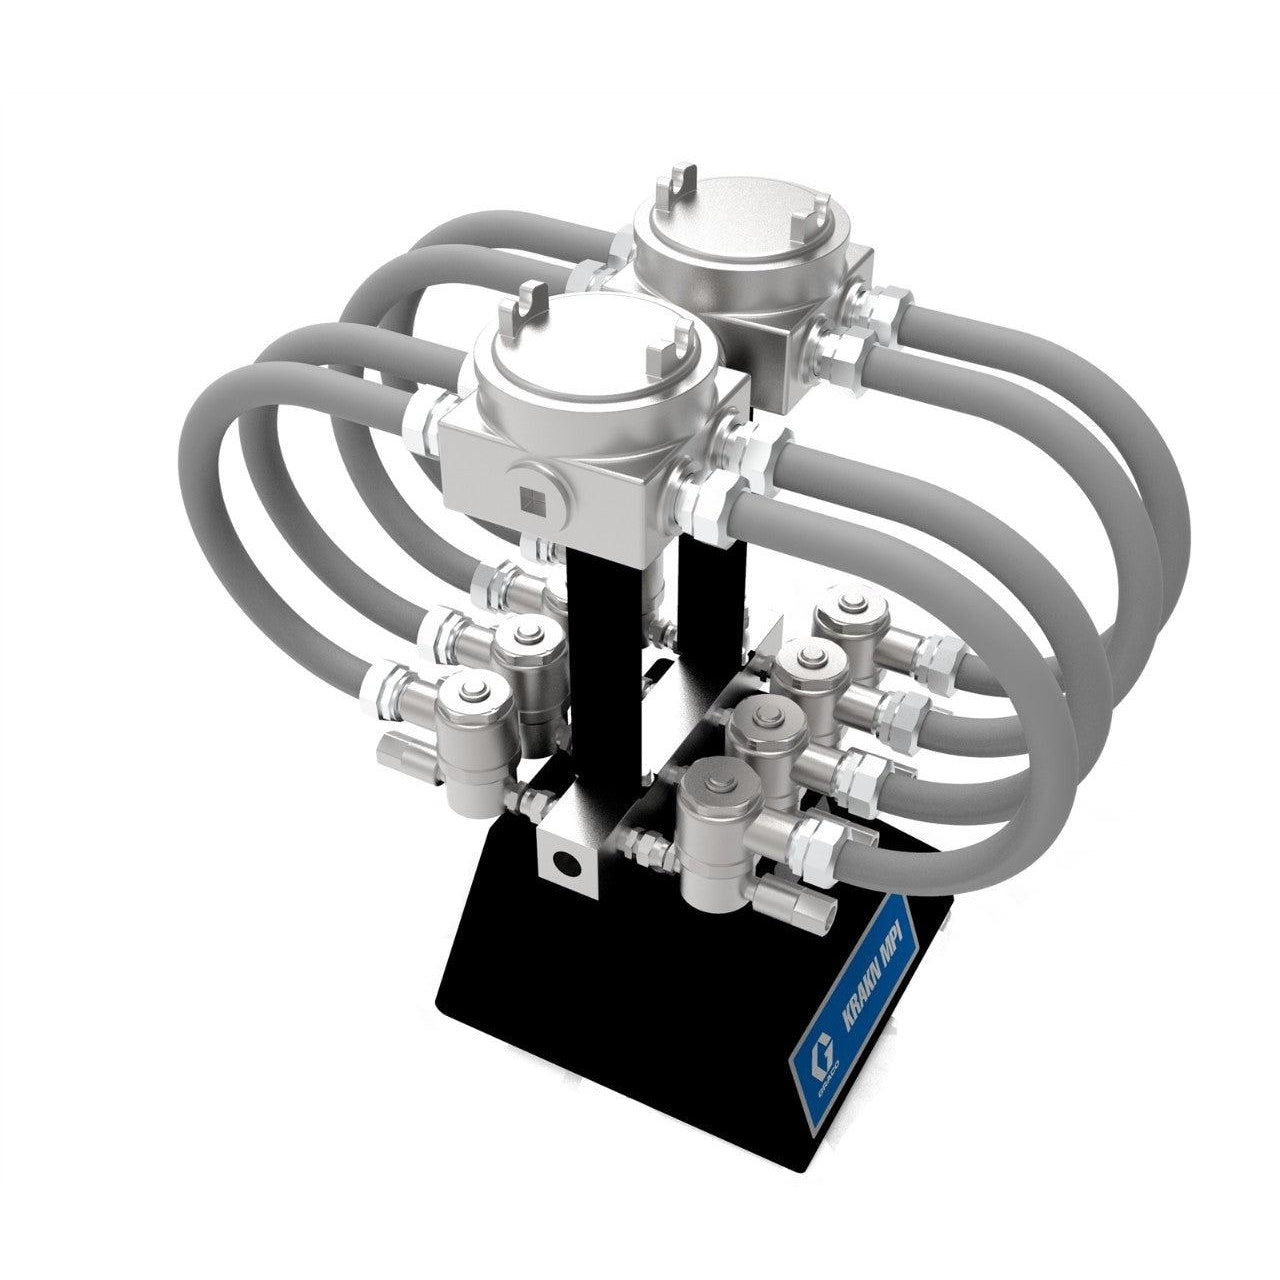 7 valve KRAKN MPI fluid manifold assembly, Class 1, Division 1 approved for Hazardous Locations